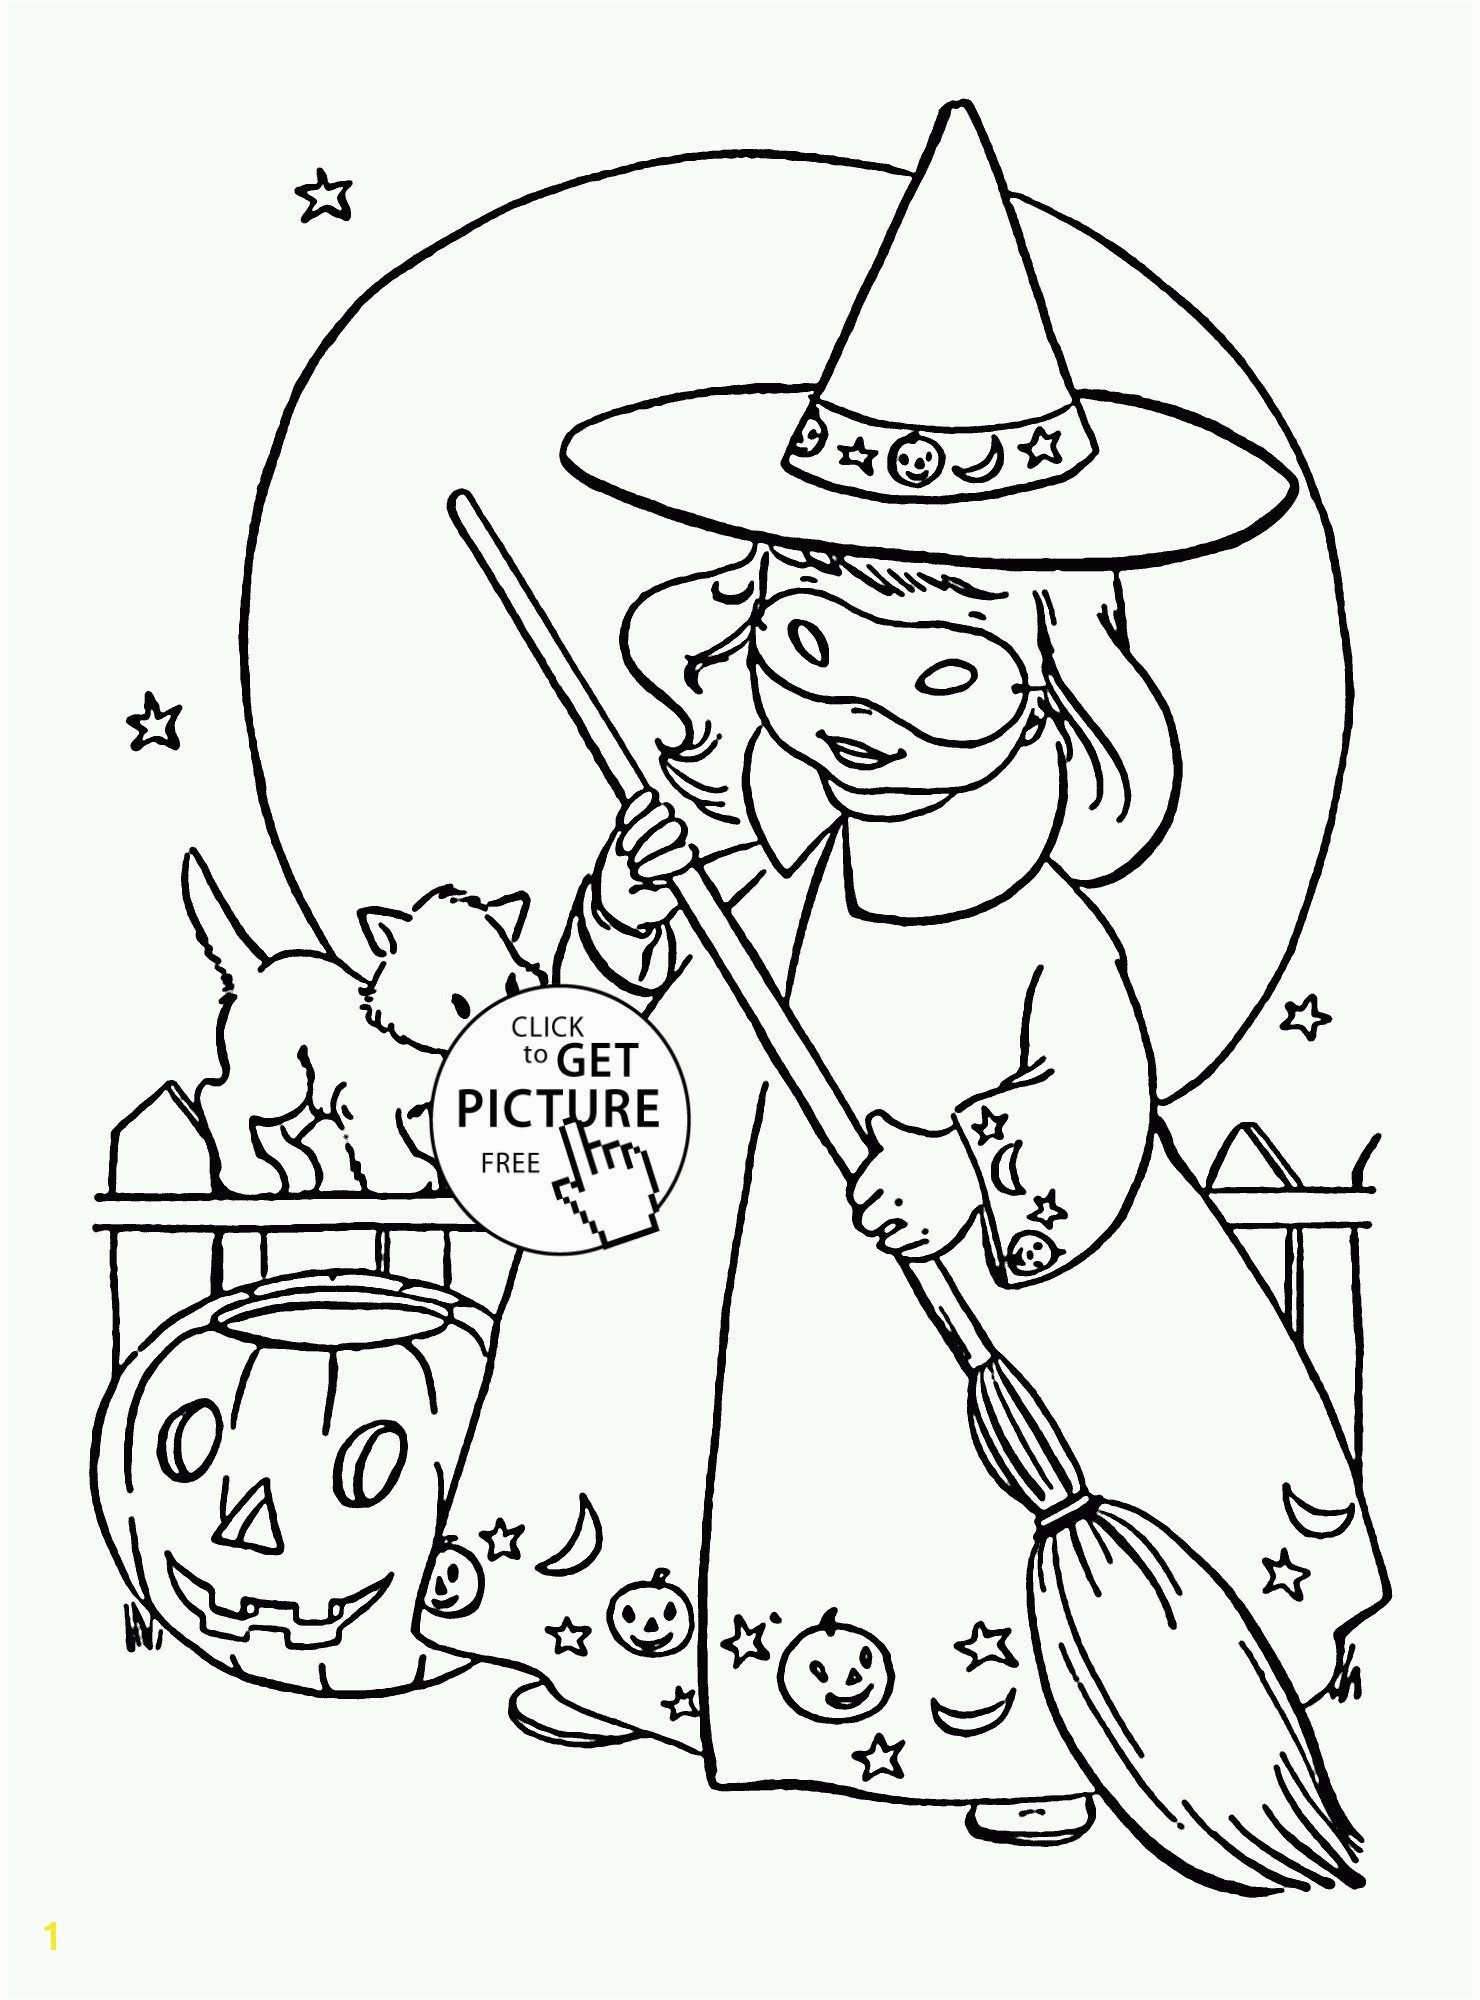 The Little Red Hen Coloring Pages Coloring Ideas Little Red Hen Coloring Page The Inspirational